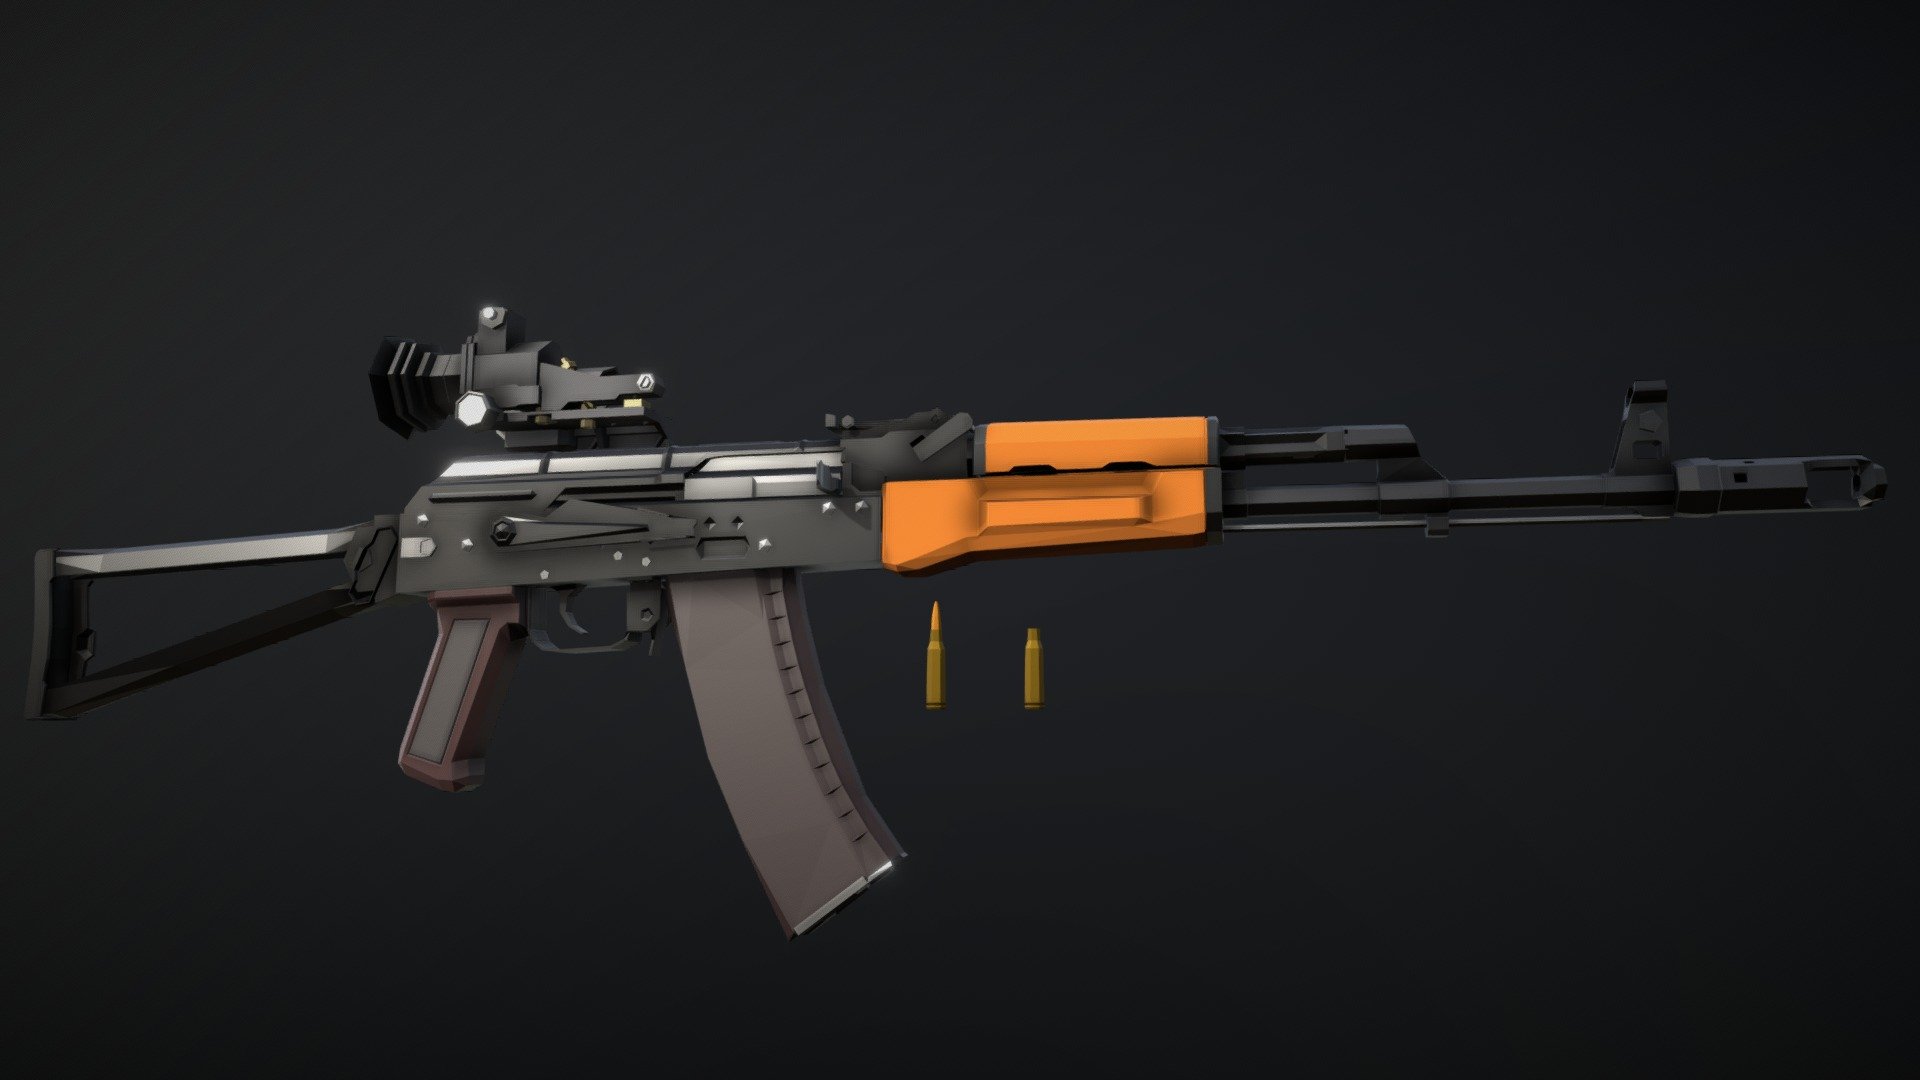 Low-Poly model of an AKS-74N with a 1P29 4x magnification scope.

7/10/22:
improved details around stock, added missing stock folding button, slightly corrected position of magazine, shape of magazine eject lever 3d model